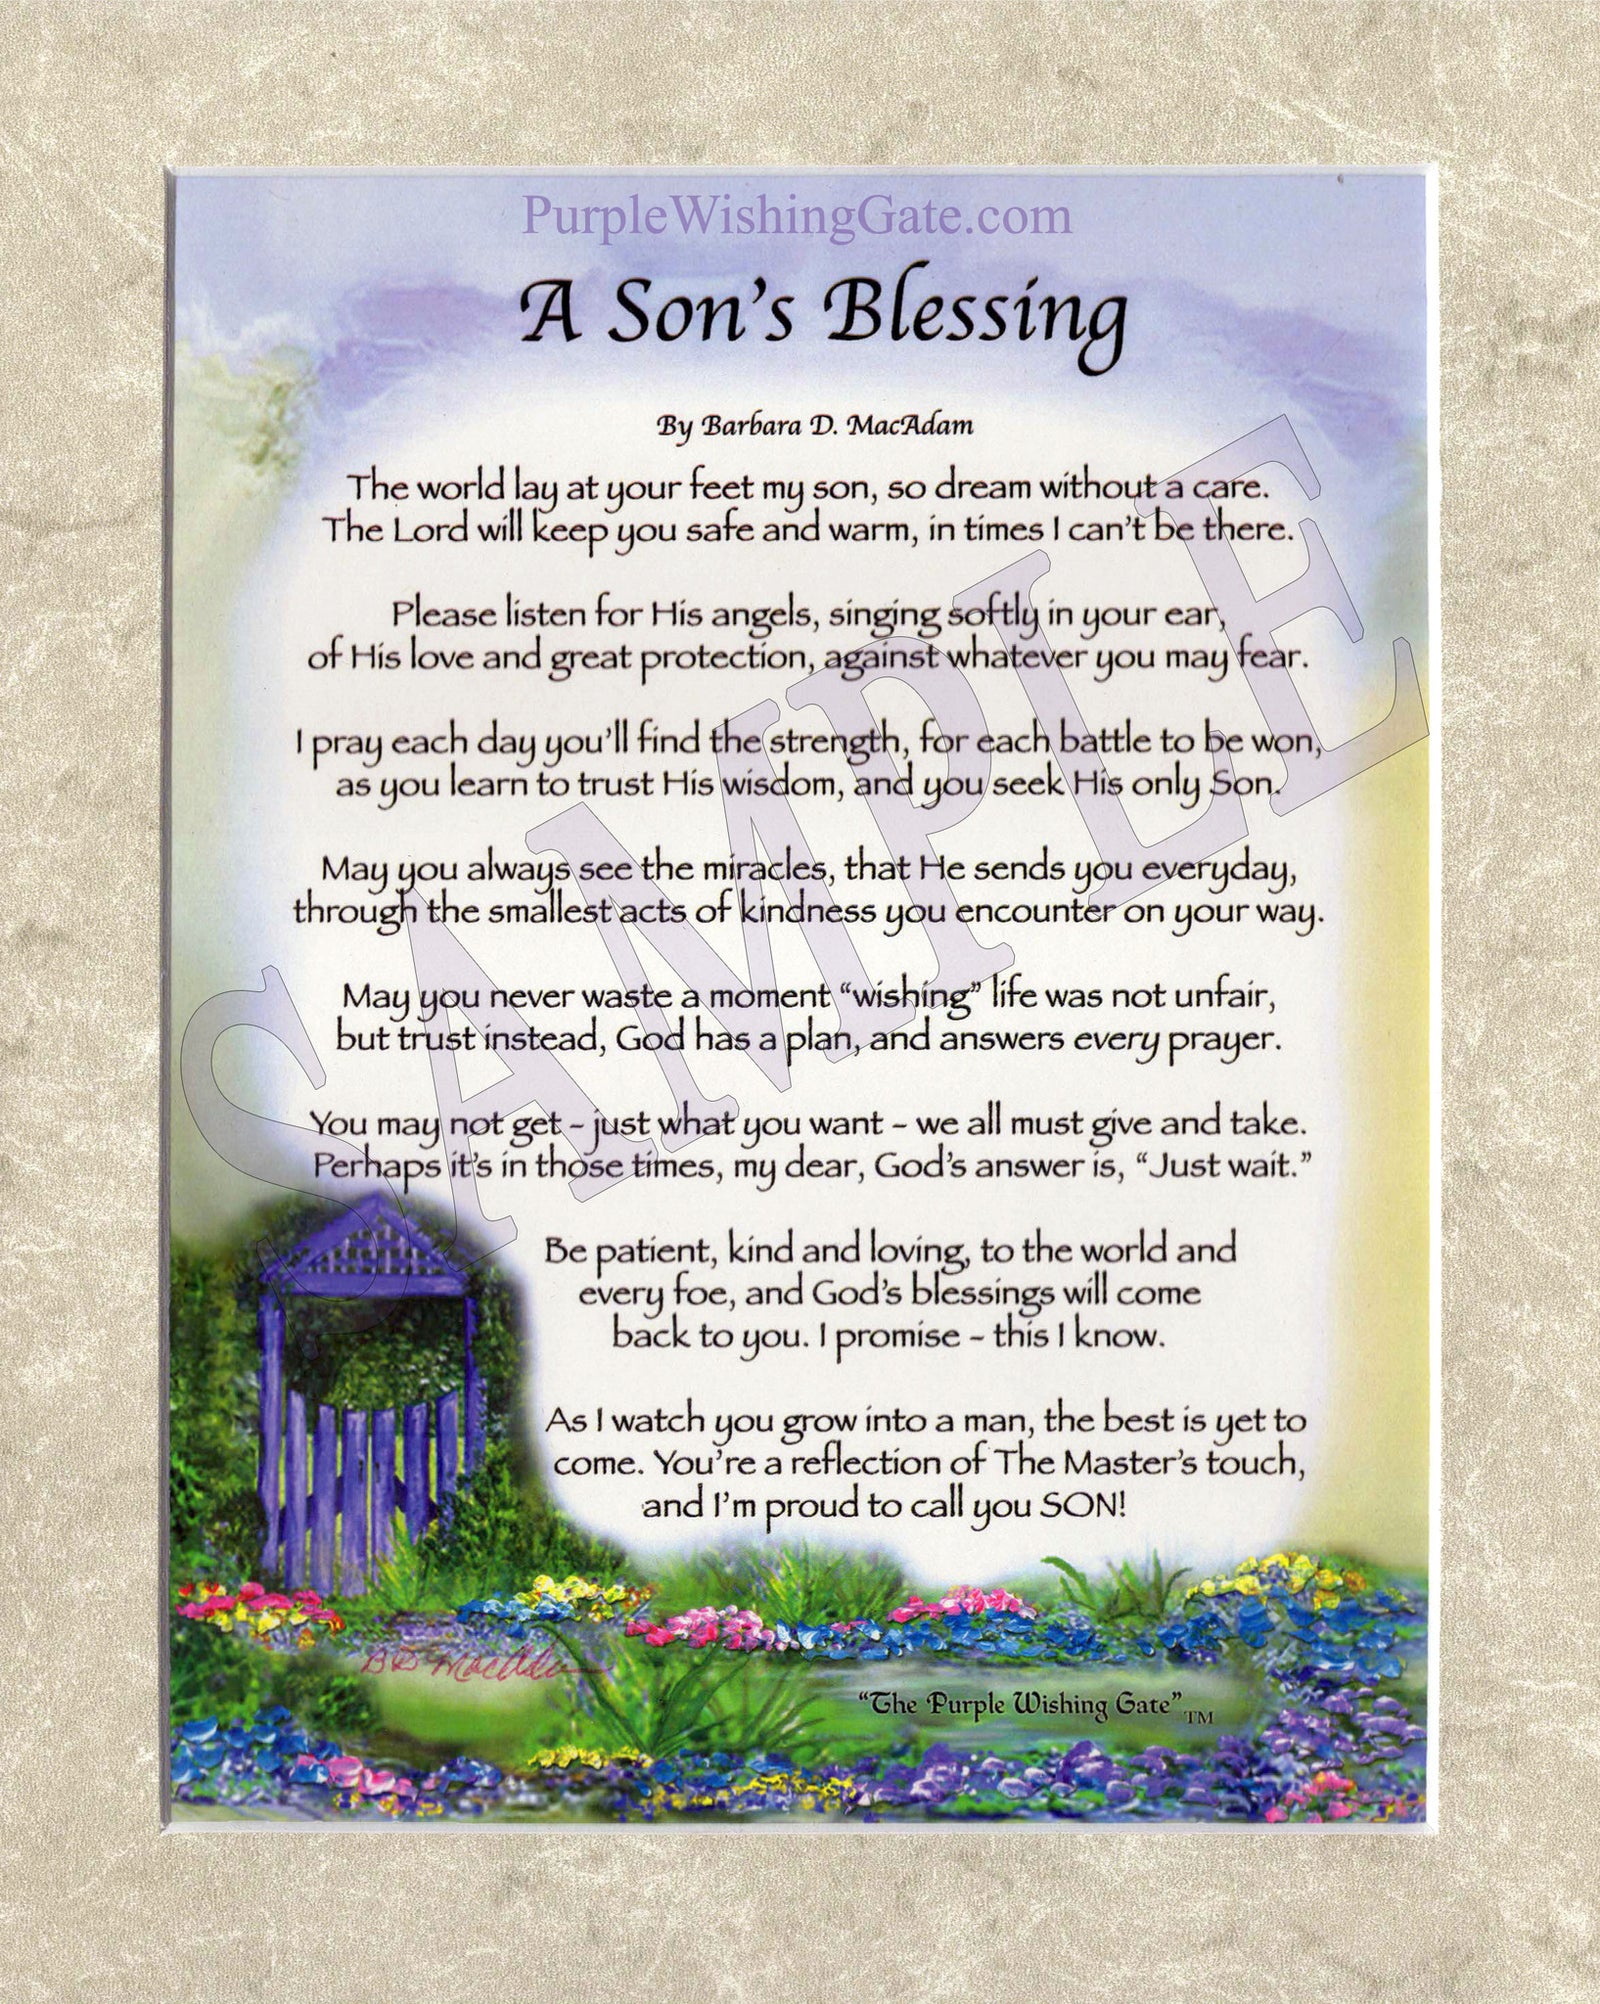 A Son's Blessing (8x10) - 8x10 Custom Matted Clearance - PurpleWishingGate.com